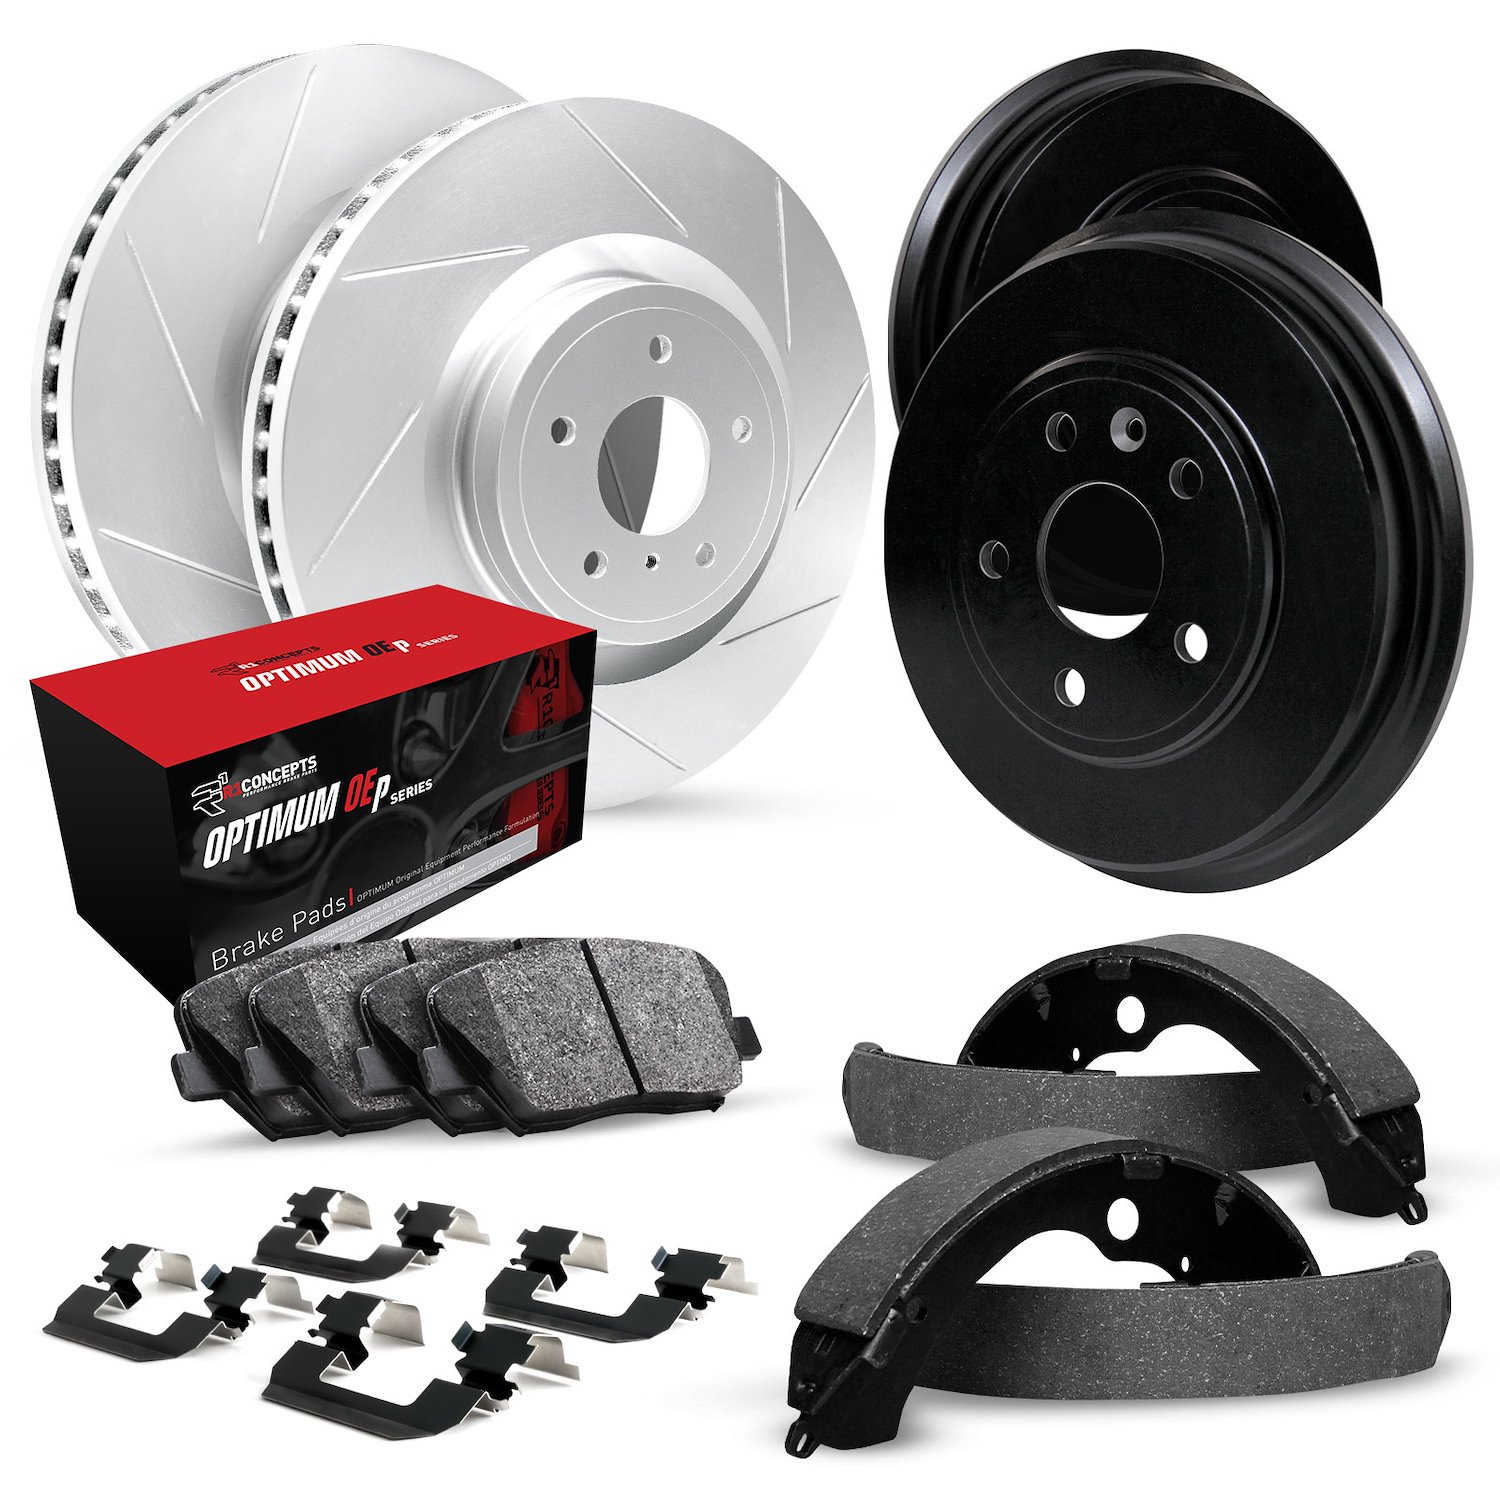 GEO-Carbon Slotted Brake Rotor & Drum Set w/Optimum OE Pads, Shoes, & Hardware, 1983-1994 Ford/Lincoln/Mercury/Mazda